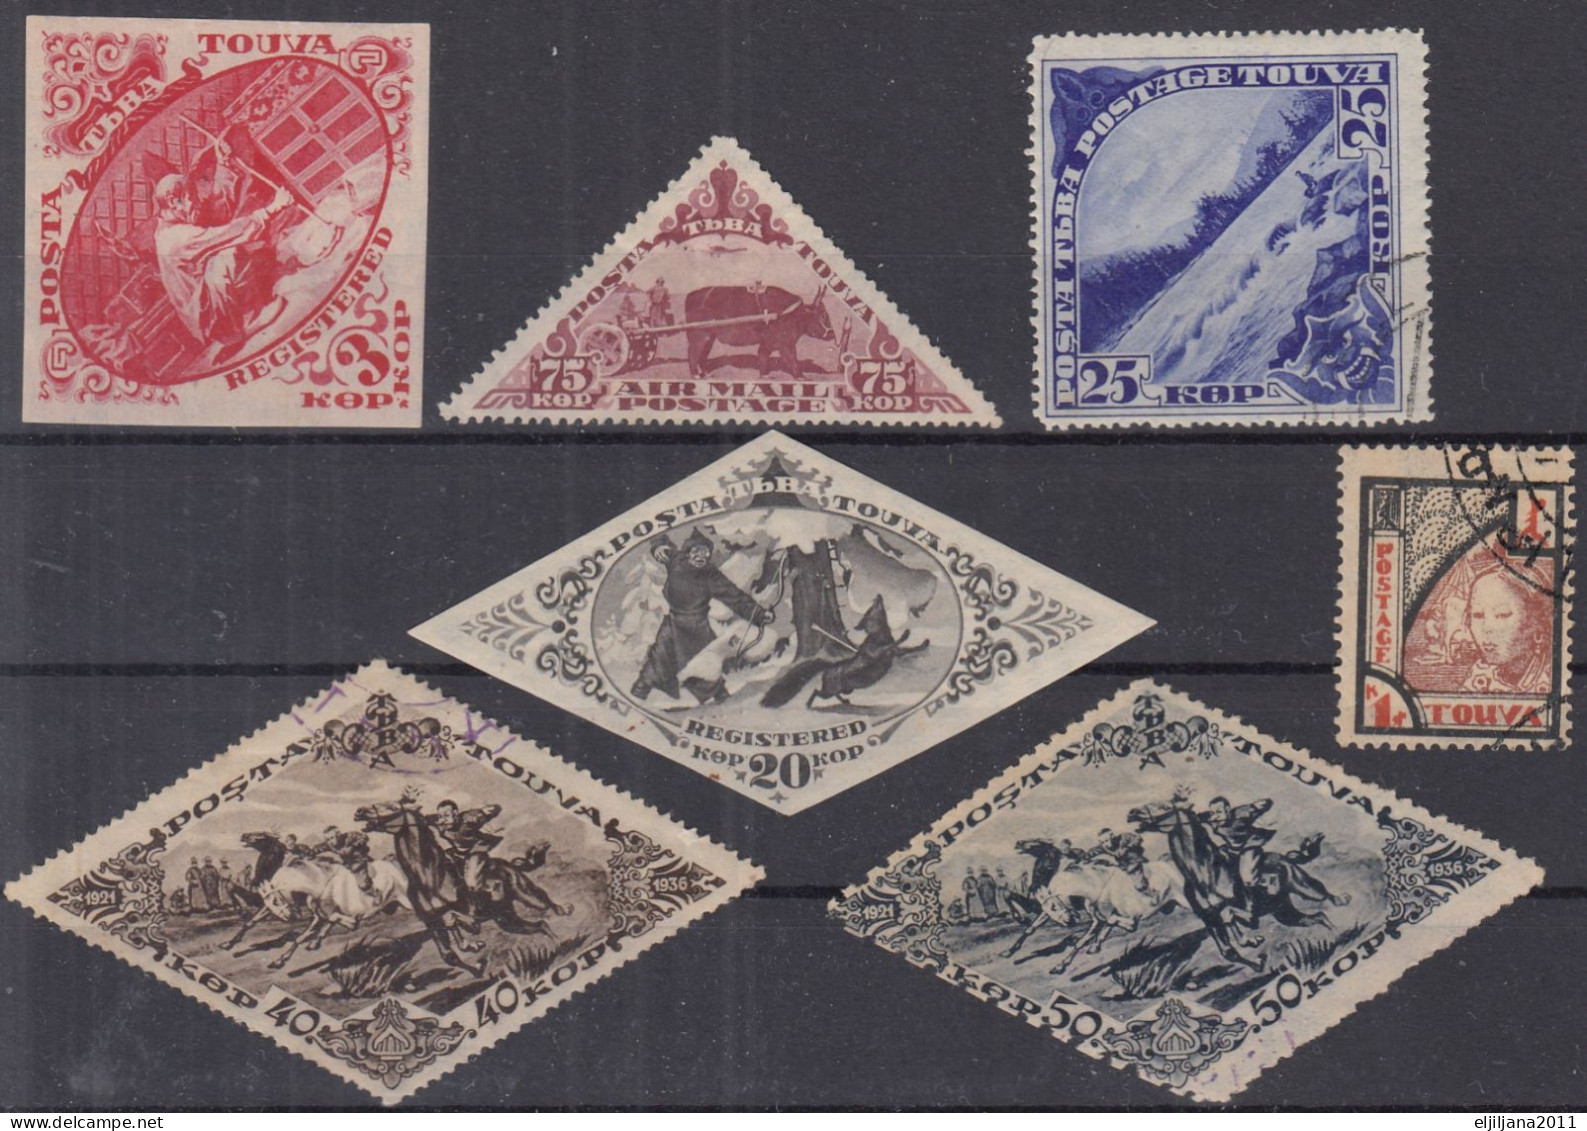 SALE !! 50 % OFF !! ⁕ TOUVA Tannu-Tuva (Northern Mongolia) ⁕ Collection From 1927 - 1936 ⁕ 7v MH & Used - Scan - Tuva